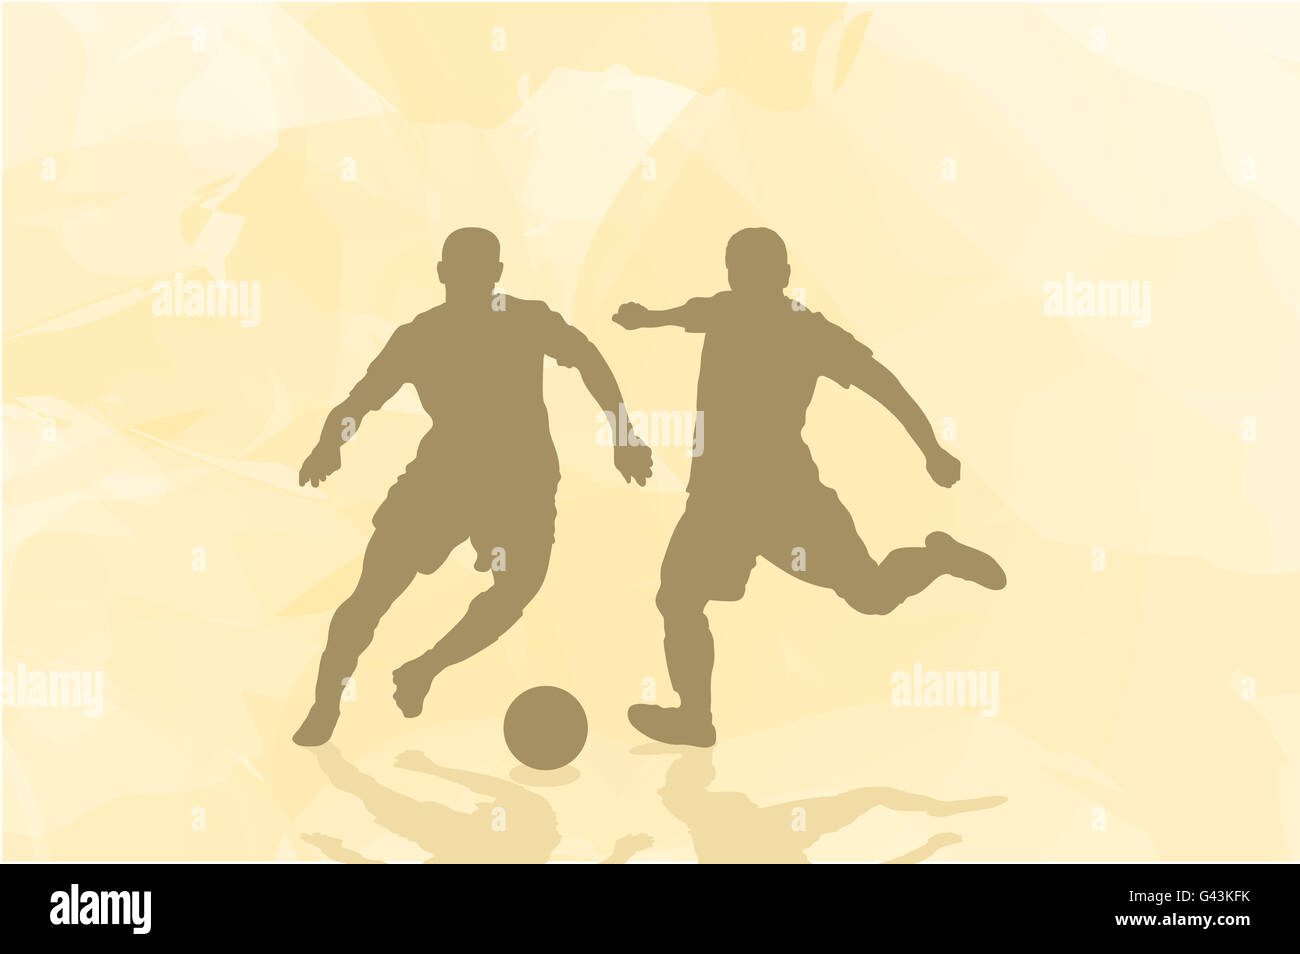 Two Soccer Players Duel in the Game 23985616 Vector Art at Vecteezy